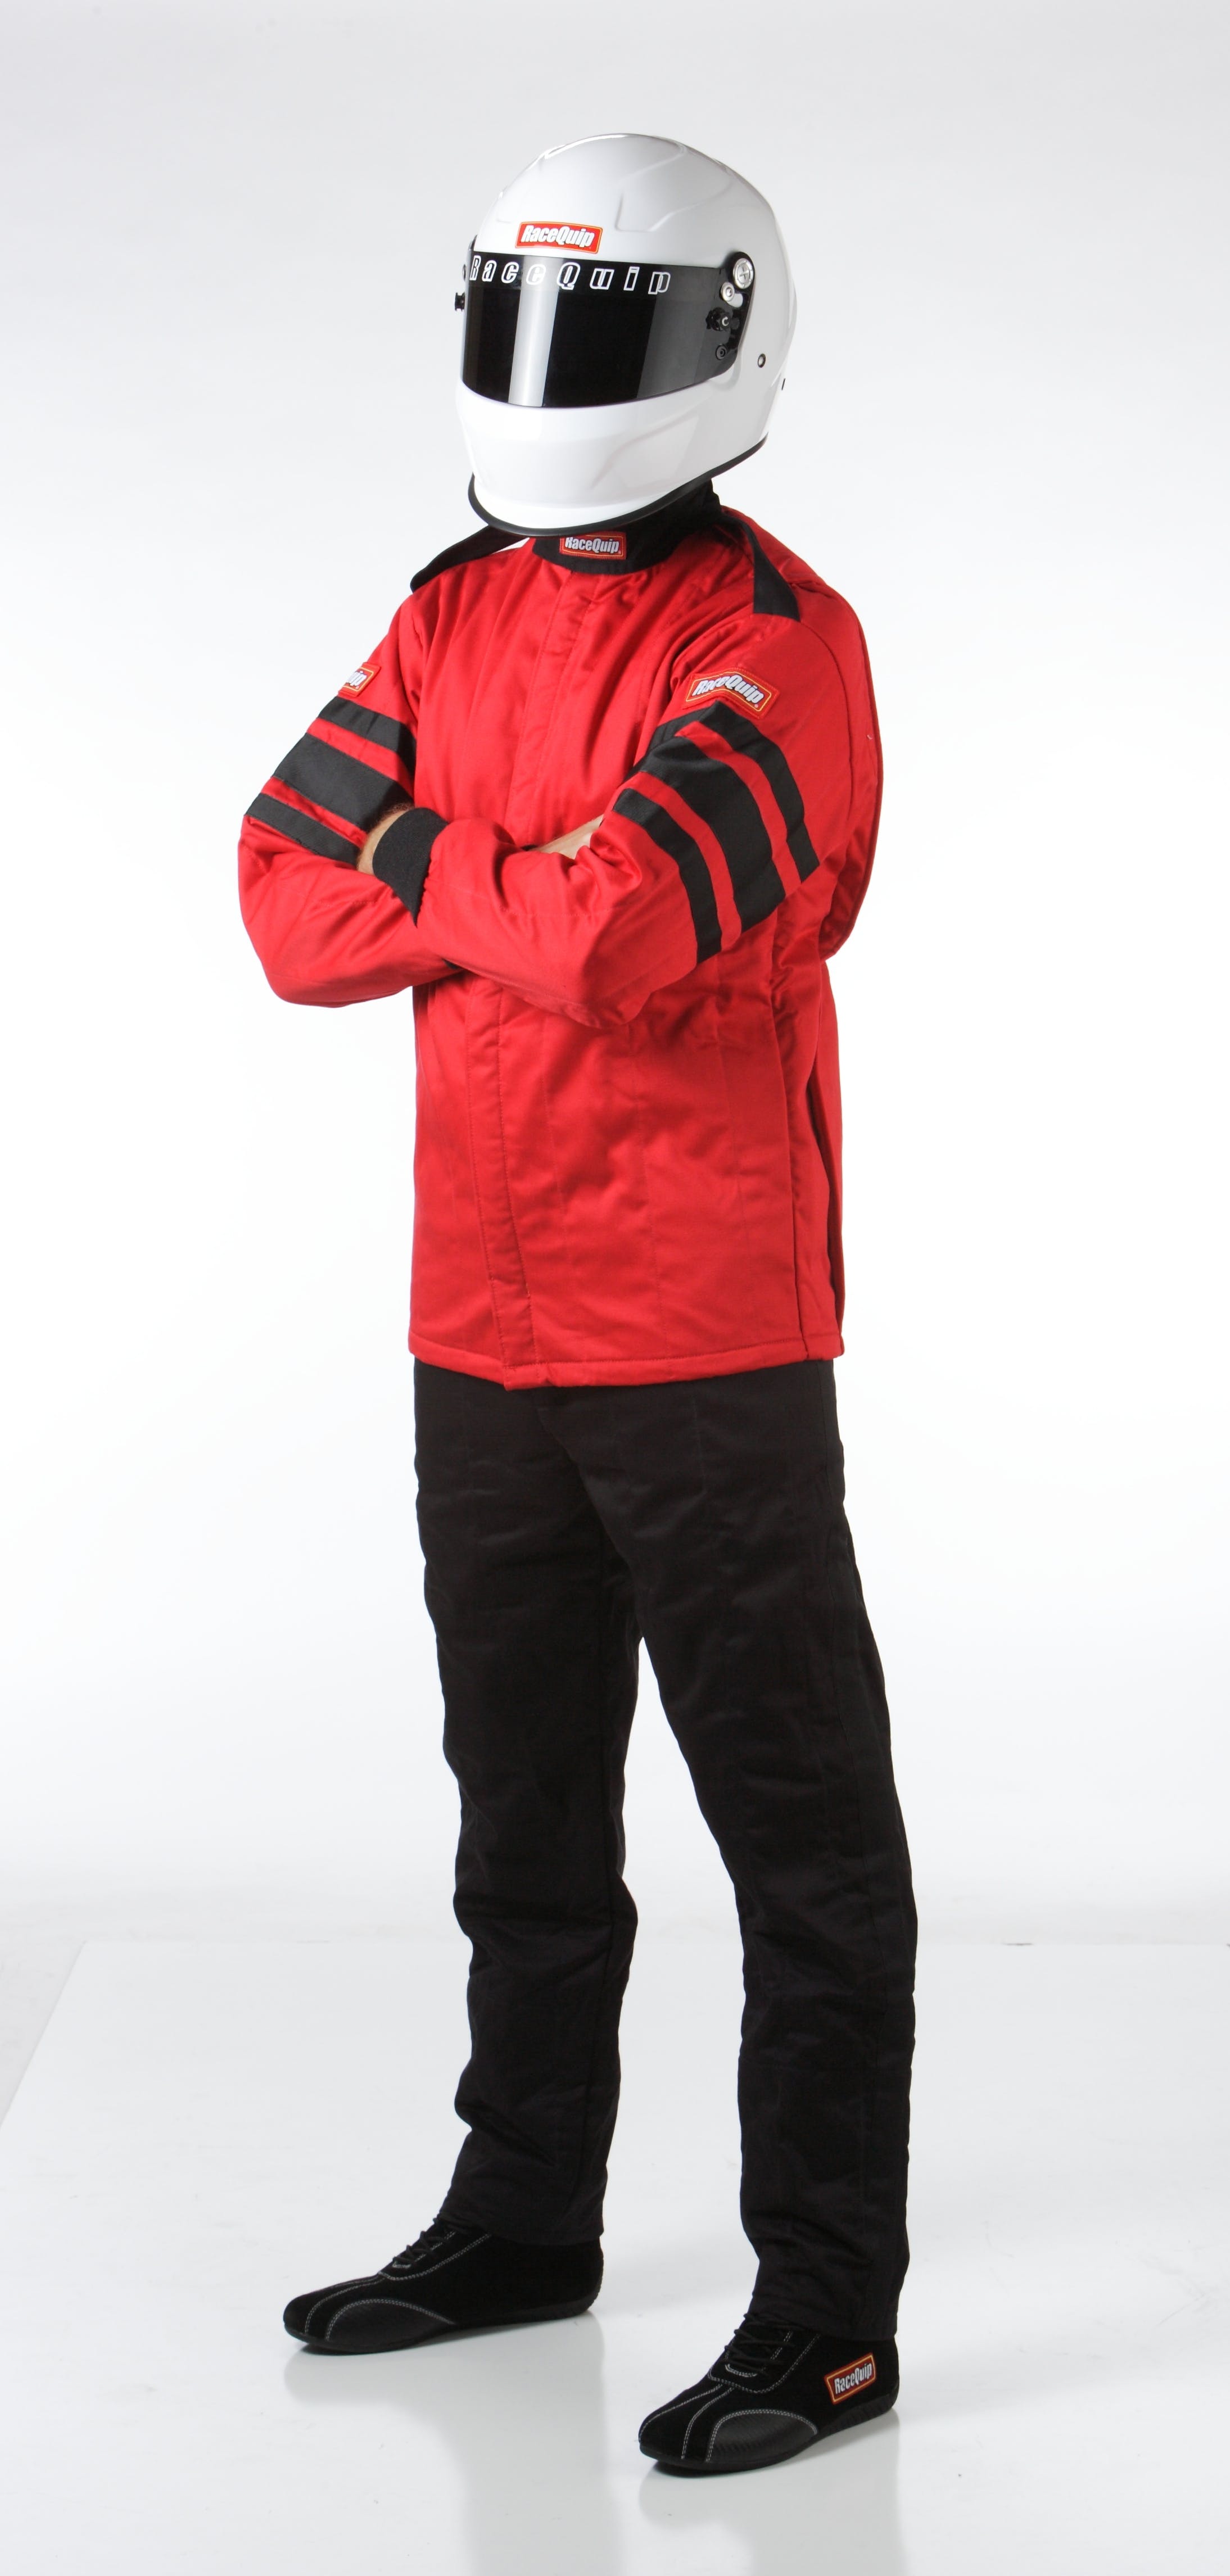 RaceQuip 121016 SFI-5 Pyrovatex Multi-Layer Racing Fire Jacket (Red, X-Large)